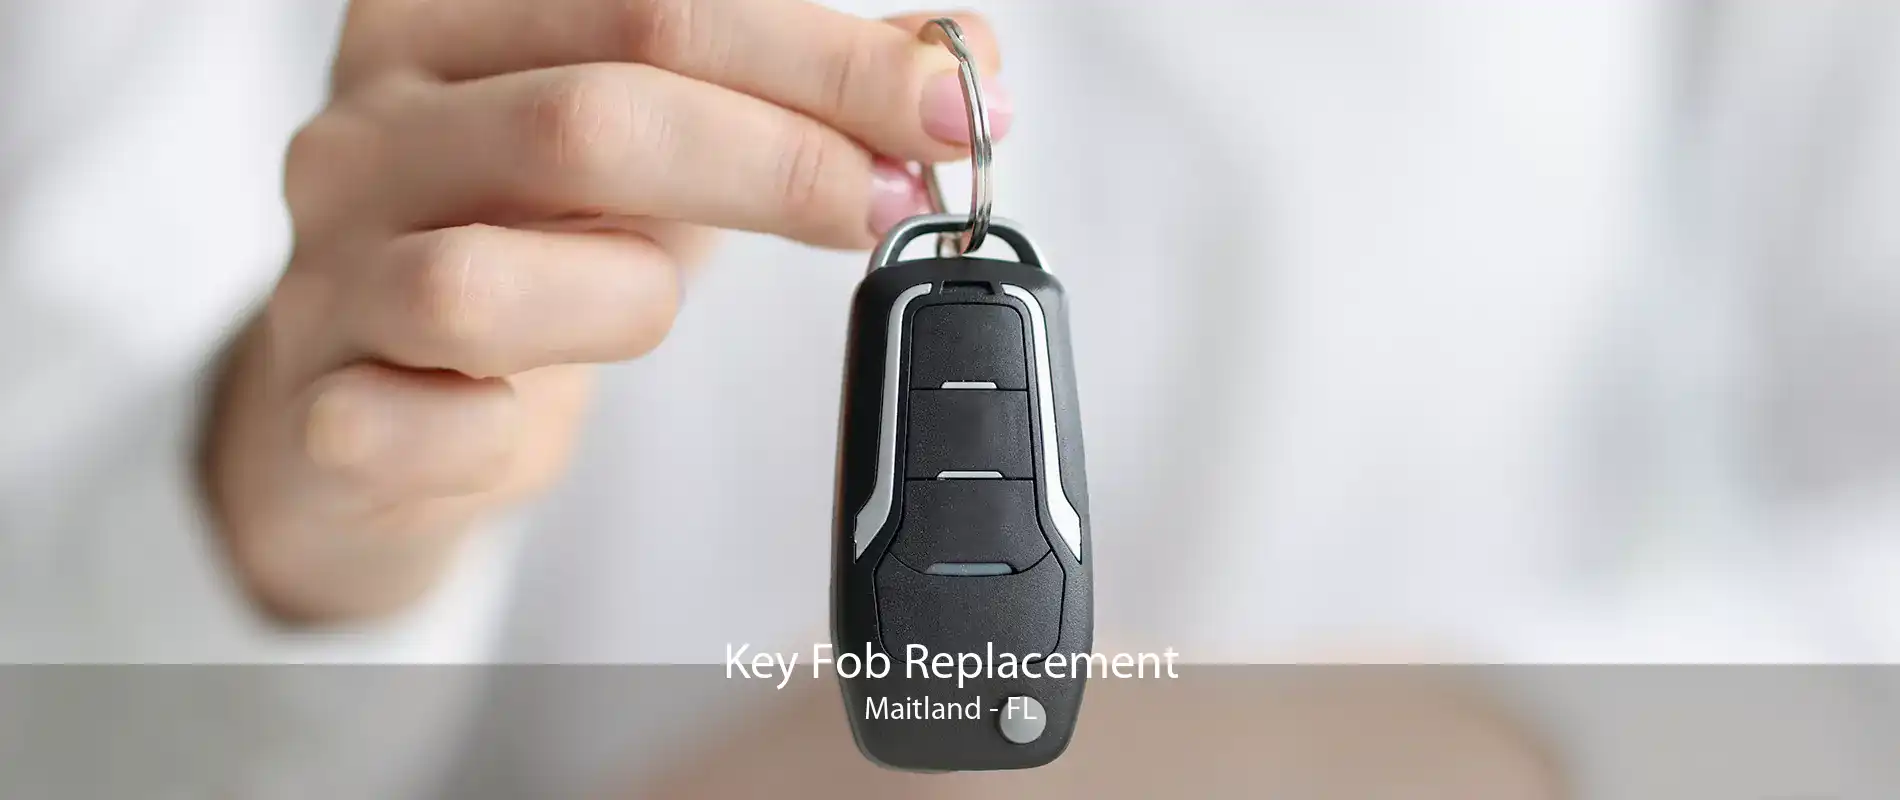 Key Fob Replacement Maitland - FL